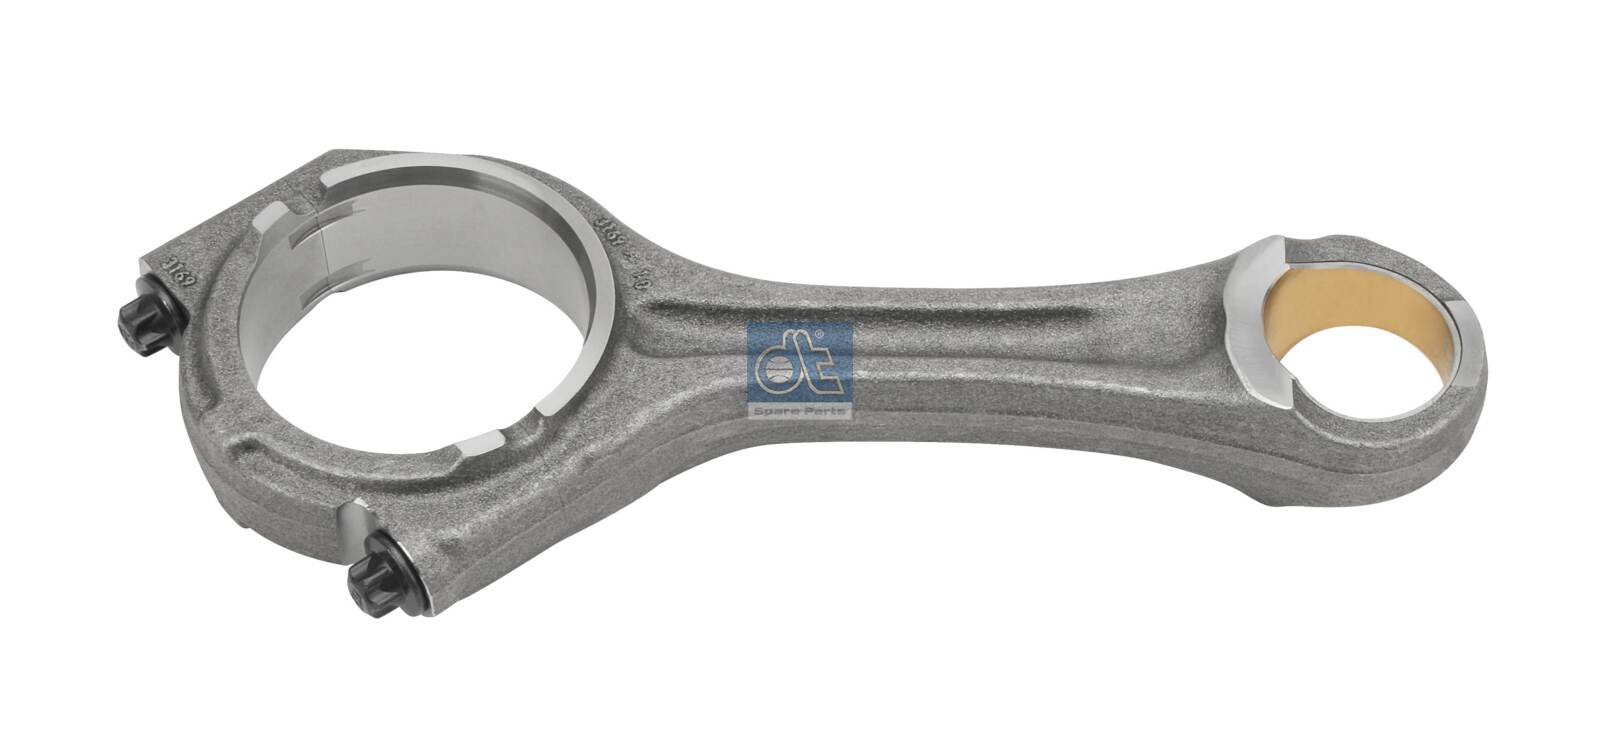 3.11028, Connecting Rod, DT Spare Parts, 51.02400.6021, 51.02400.6030, 51.02400.6054, 020310287601, 026.121, 05.11.014, 103087, 175689, 20060228761, 21030421, 42460, 51024006054, 55032011